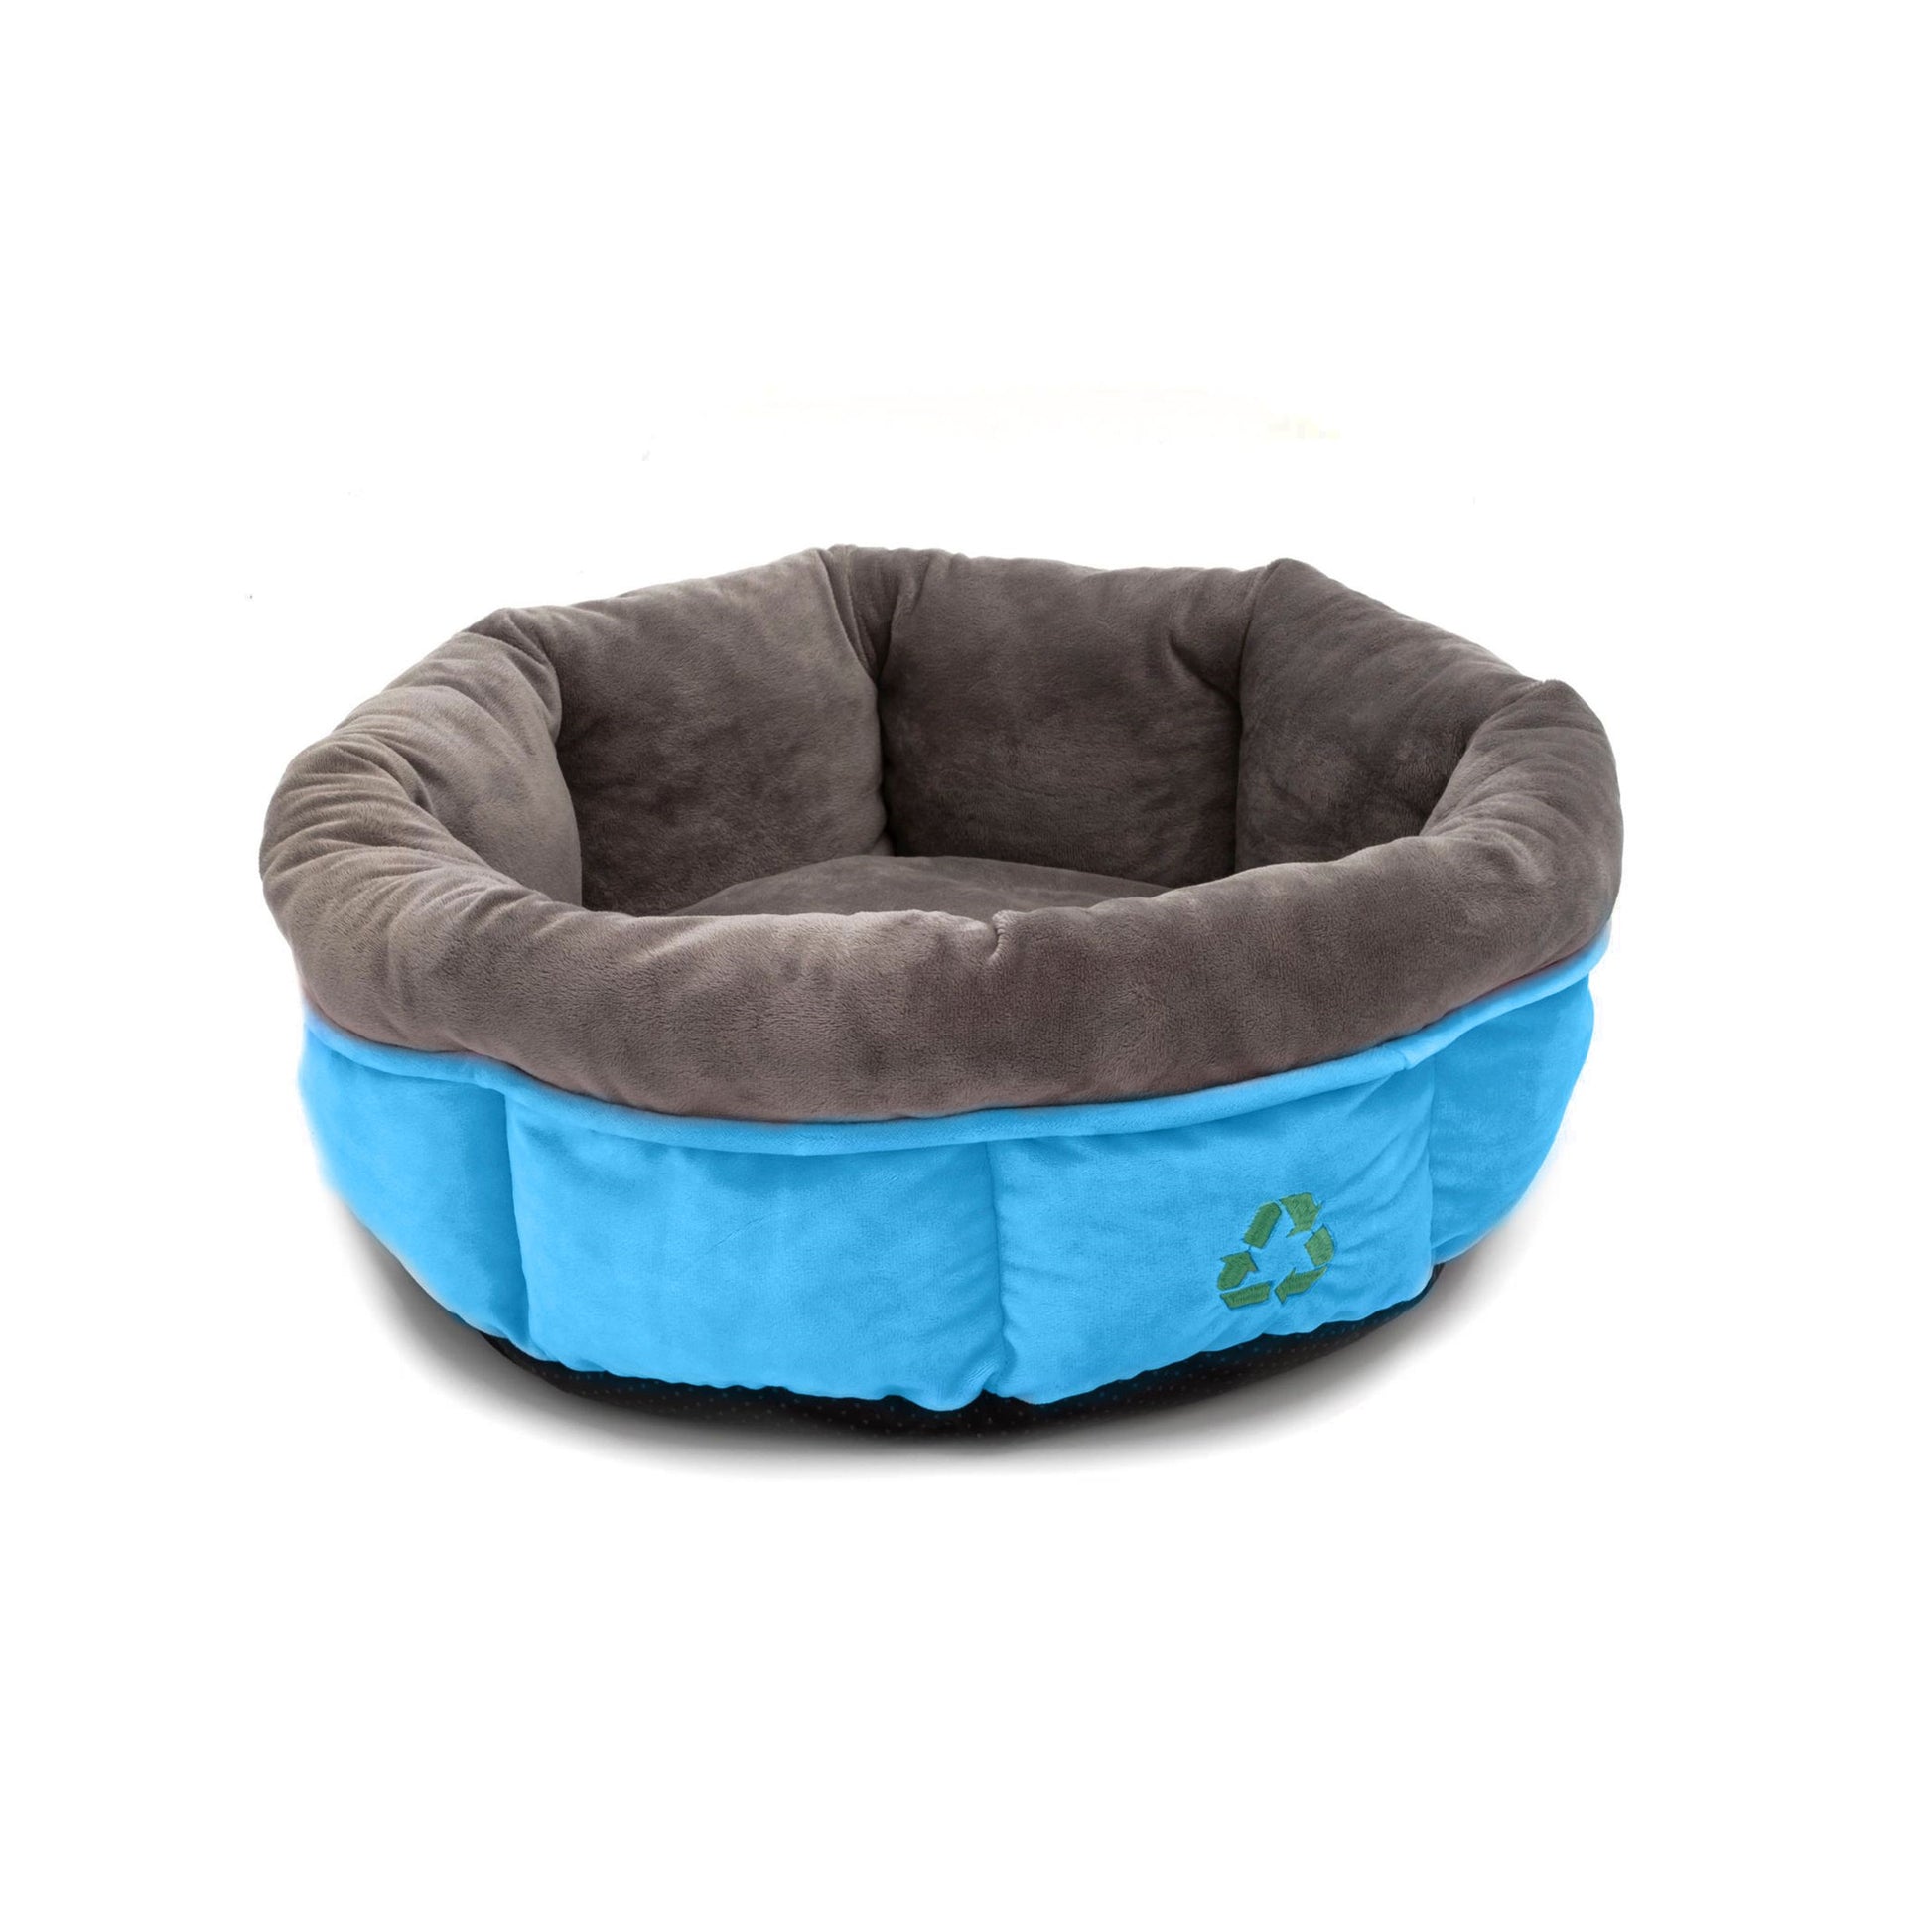 Plush recycled pet bed made with dark grey interior and blue exterior. With a green recycling symbol on the front.